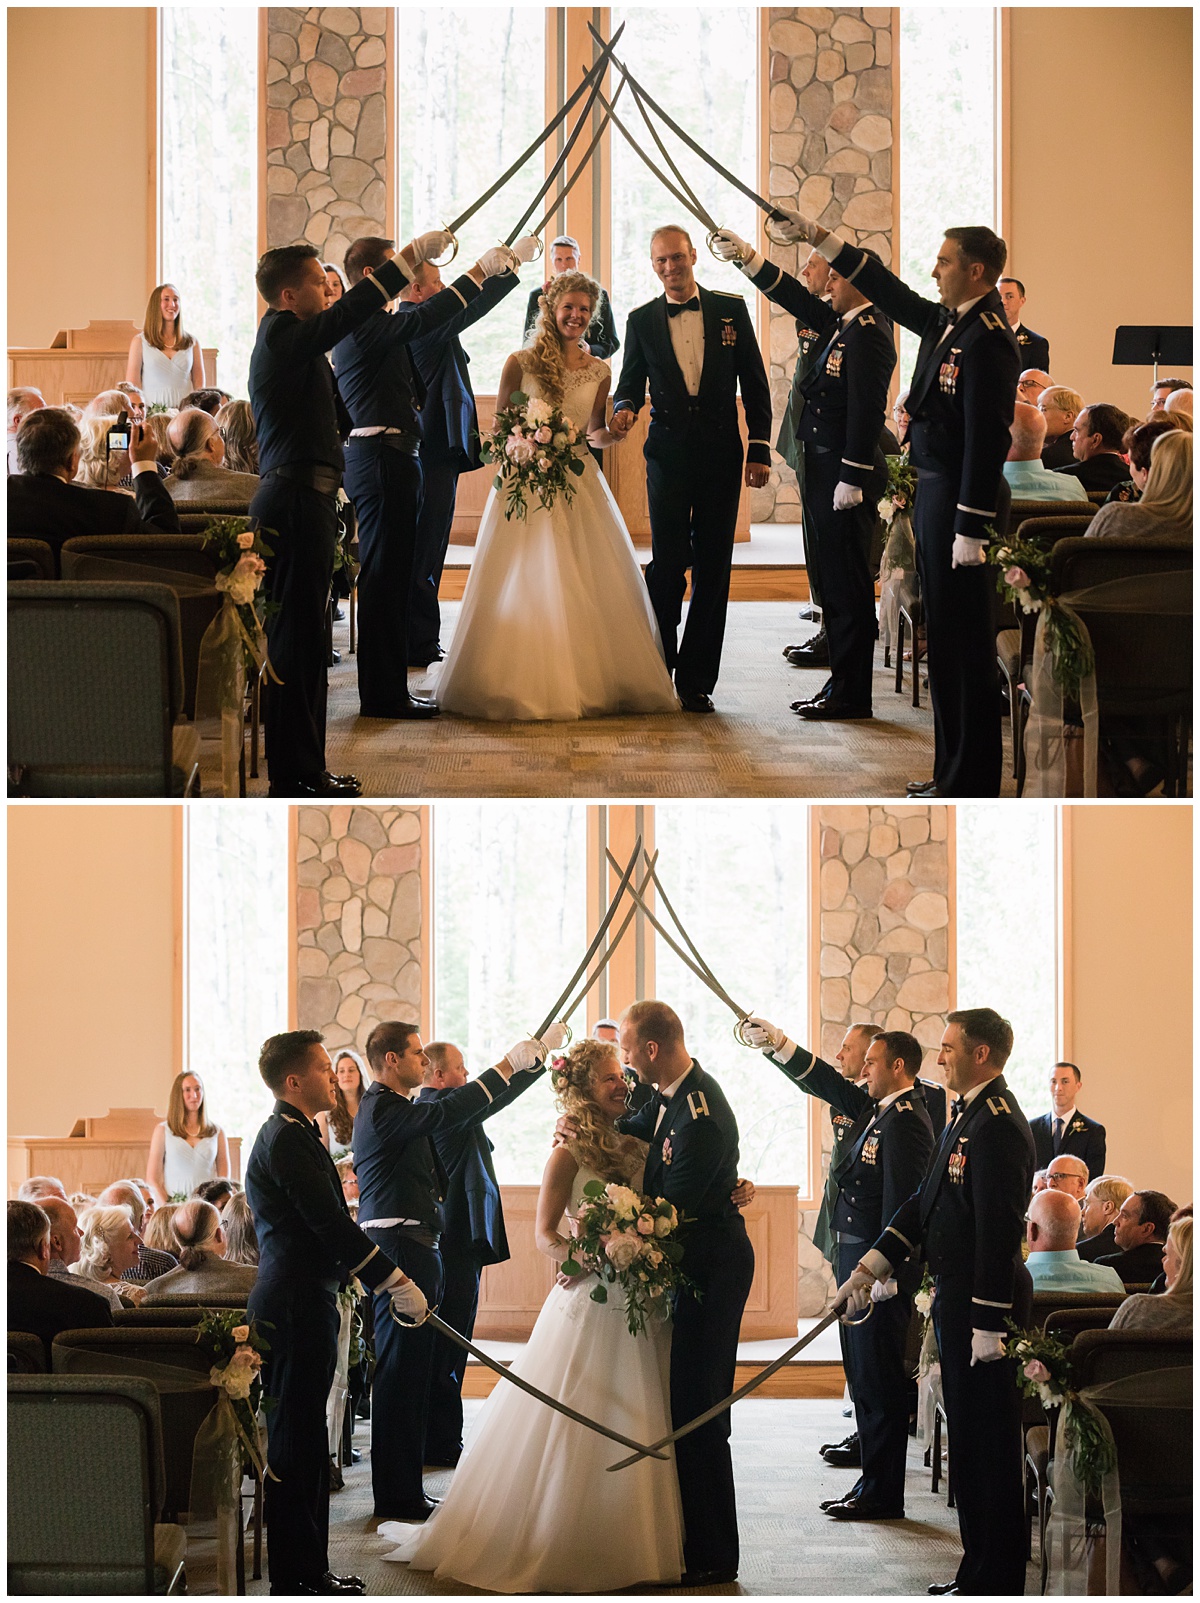 a husband and wife walk under swords during the recessional and then are stopped at the end of the line for a kiss